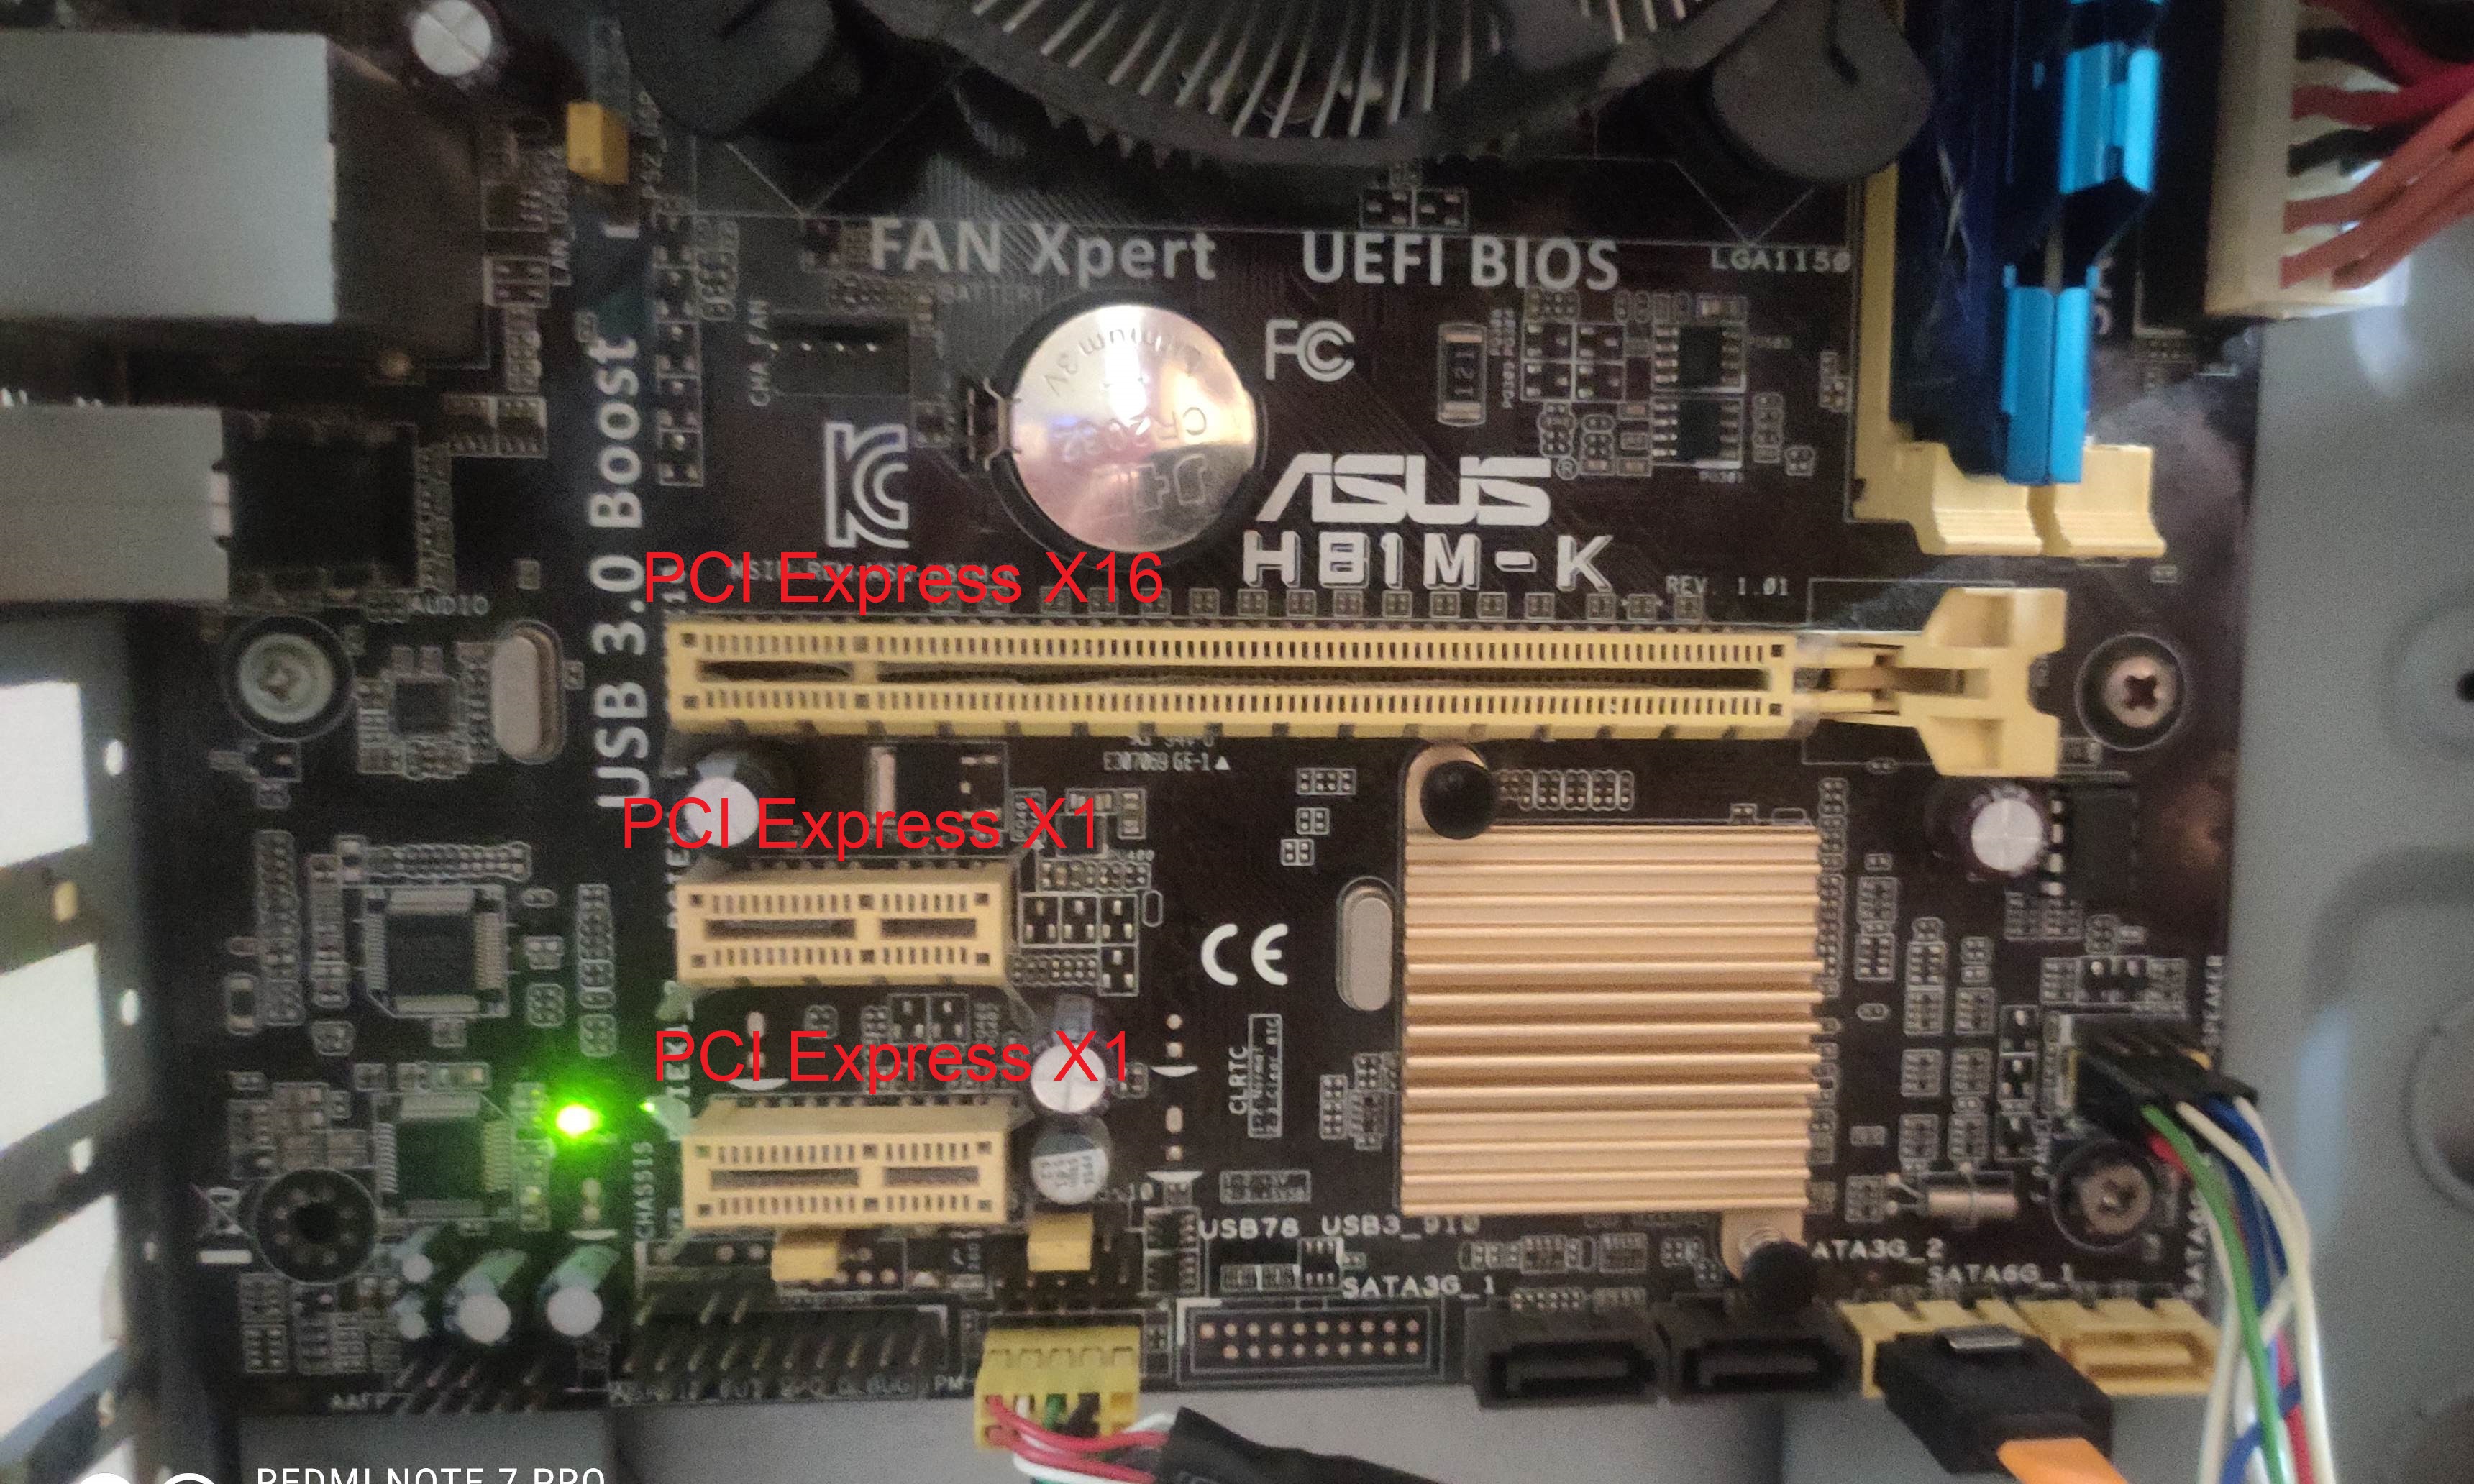 Check the physical connections of the GPU:
Ensure that the GPU is securely seated in its slot on the motherboard.